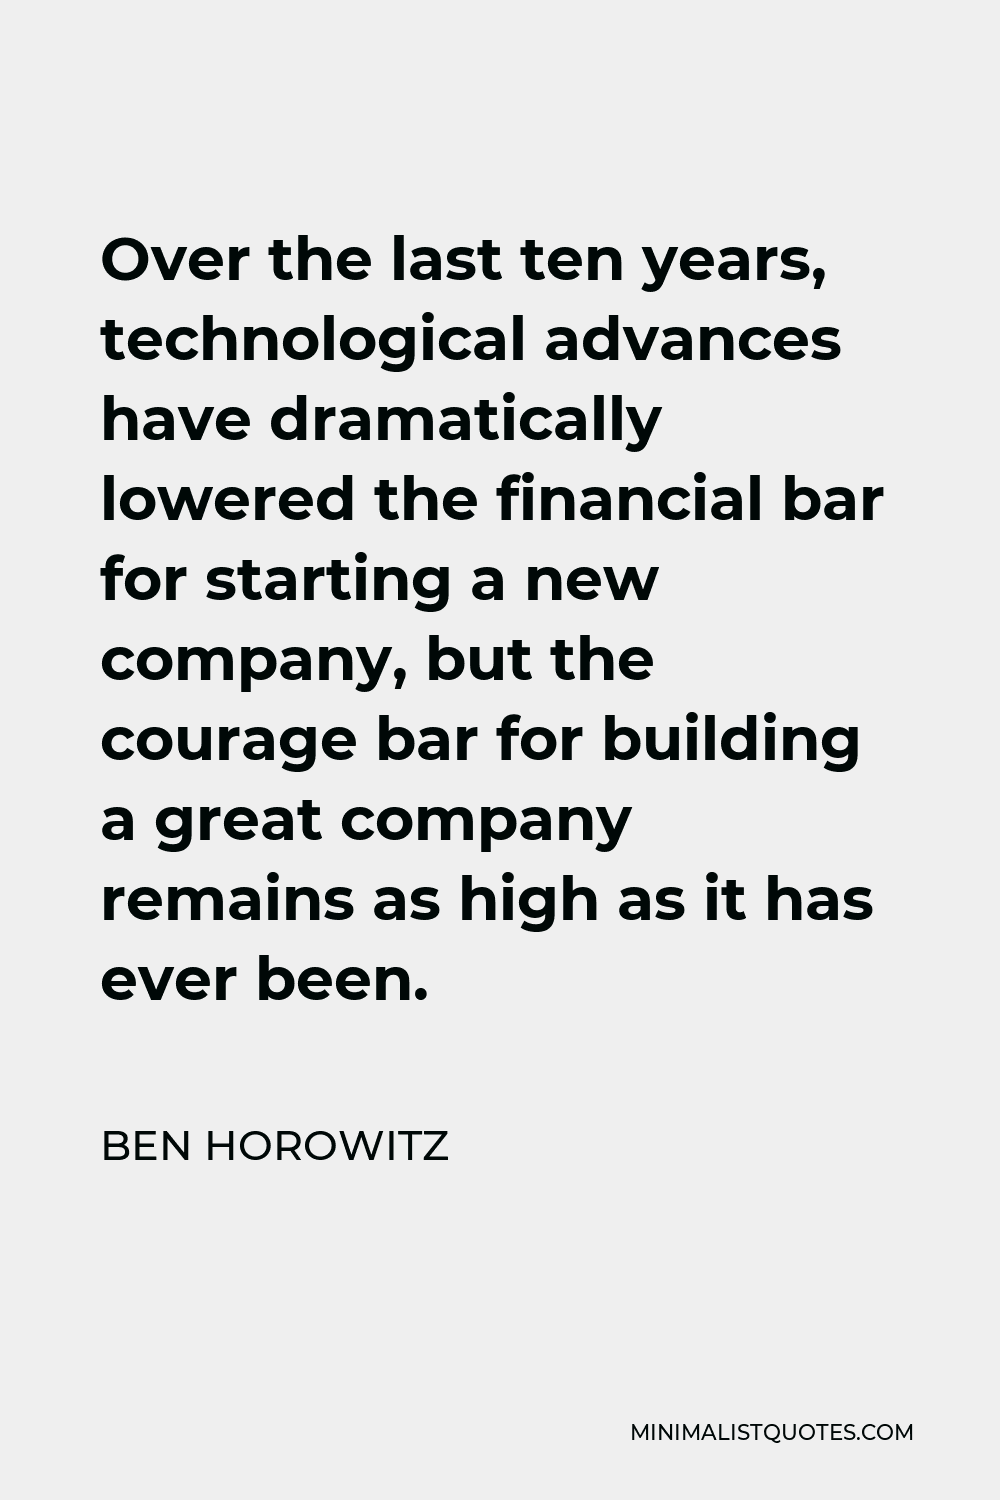 Ben Horowitz Quote - Over the last ten years, technological advances have dramatically lowered the financial bar for starting a new company, but the courage bar for building a great company remains as high as it has ever been.